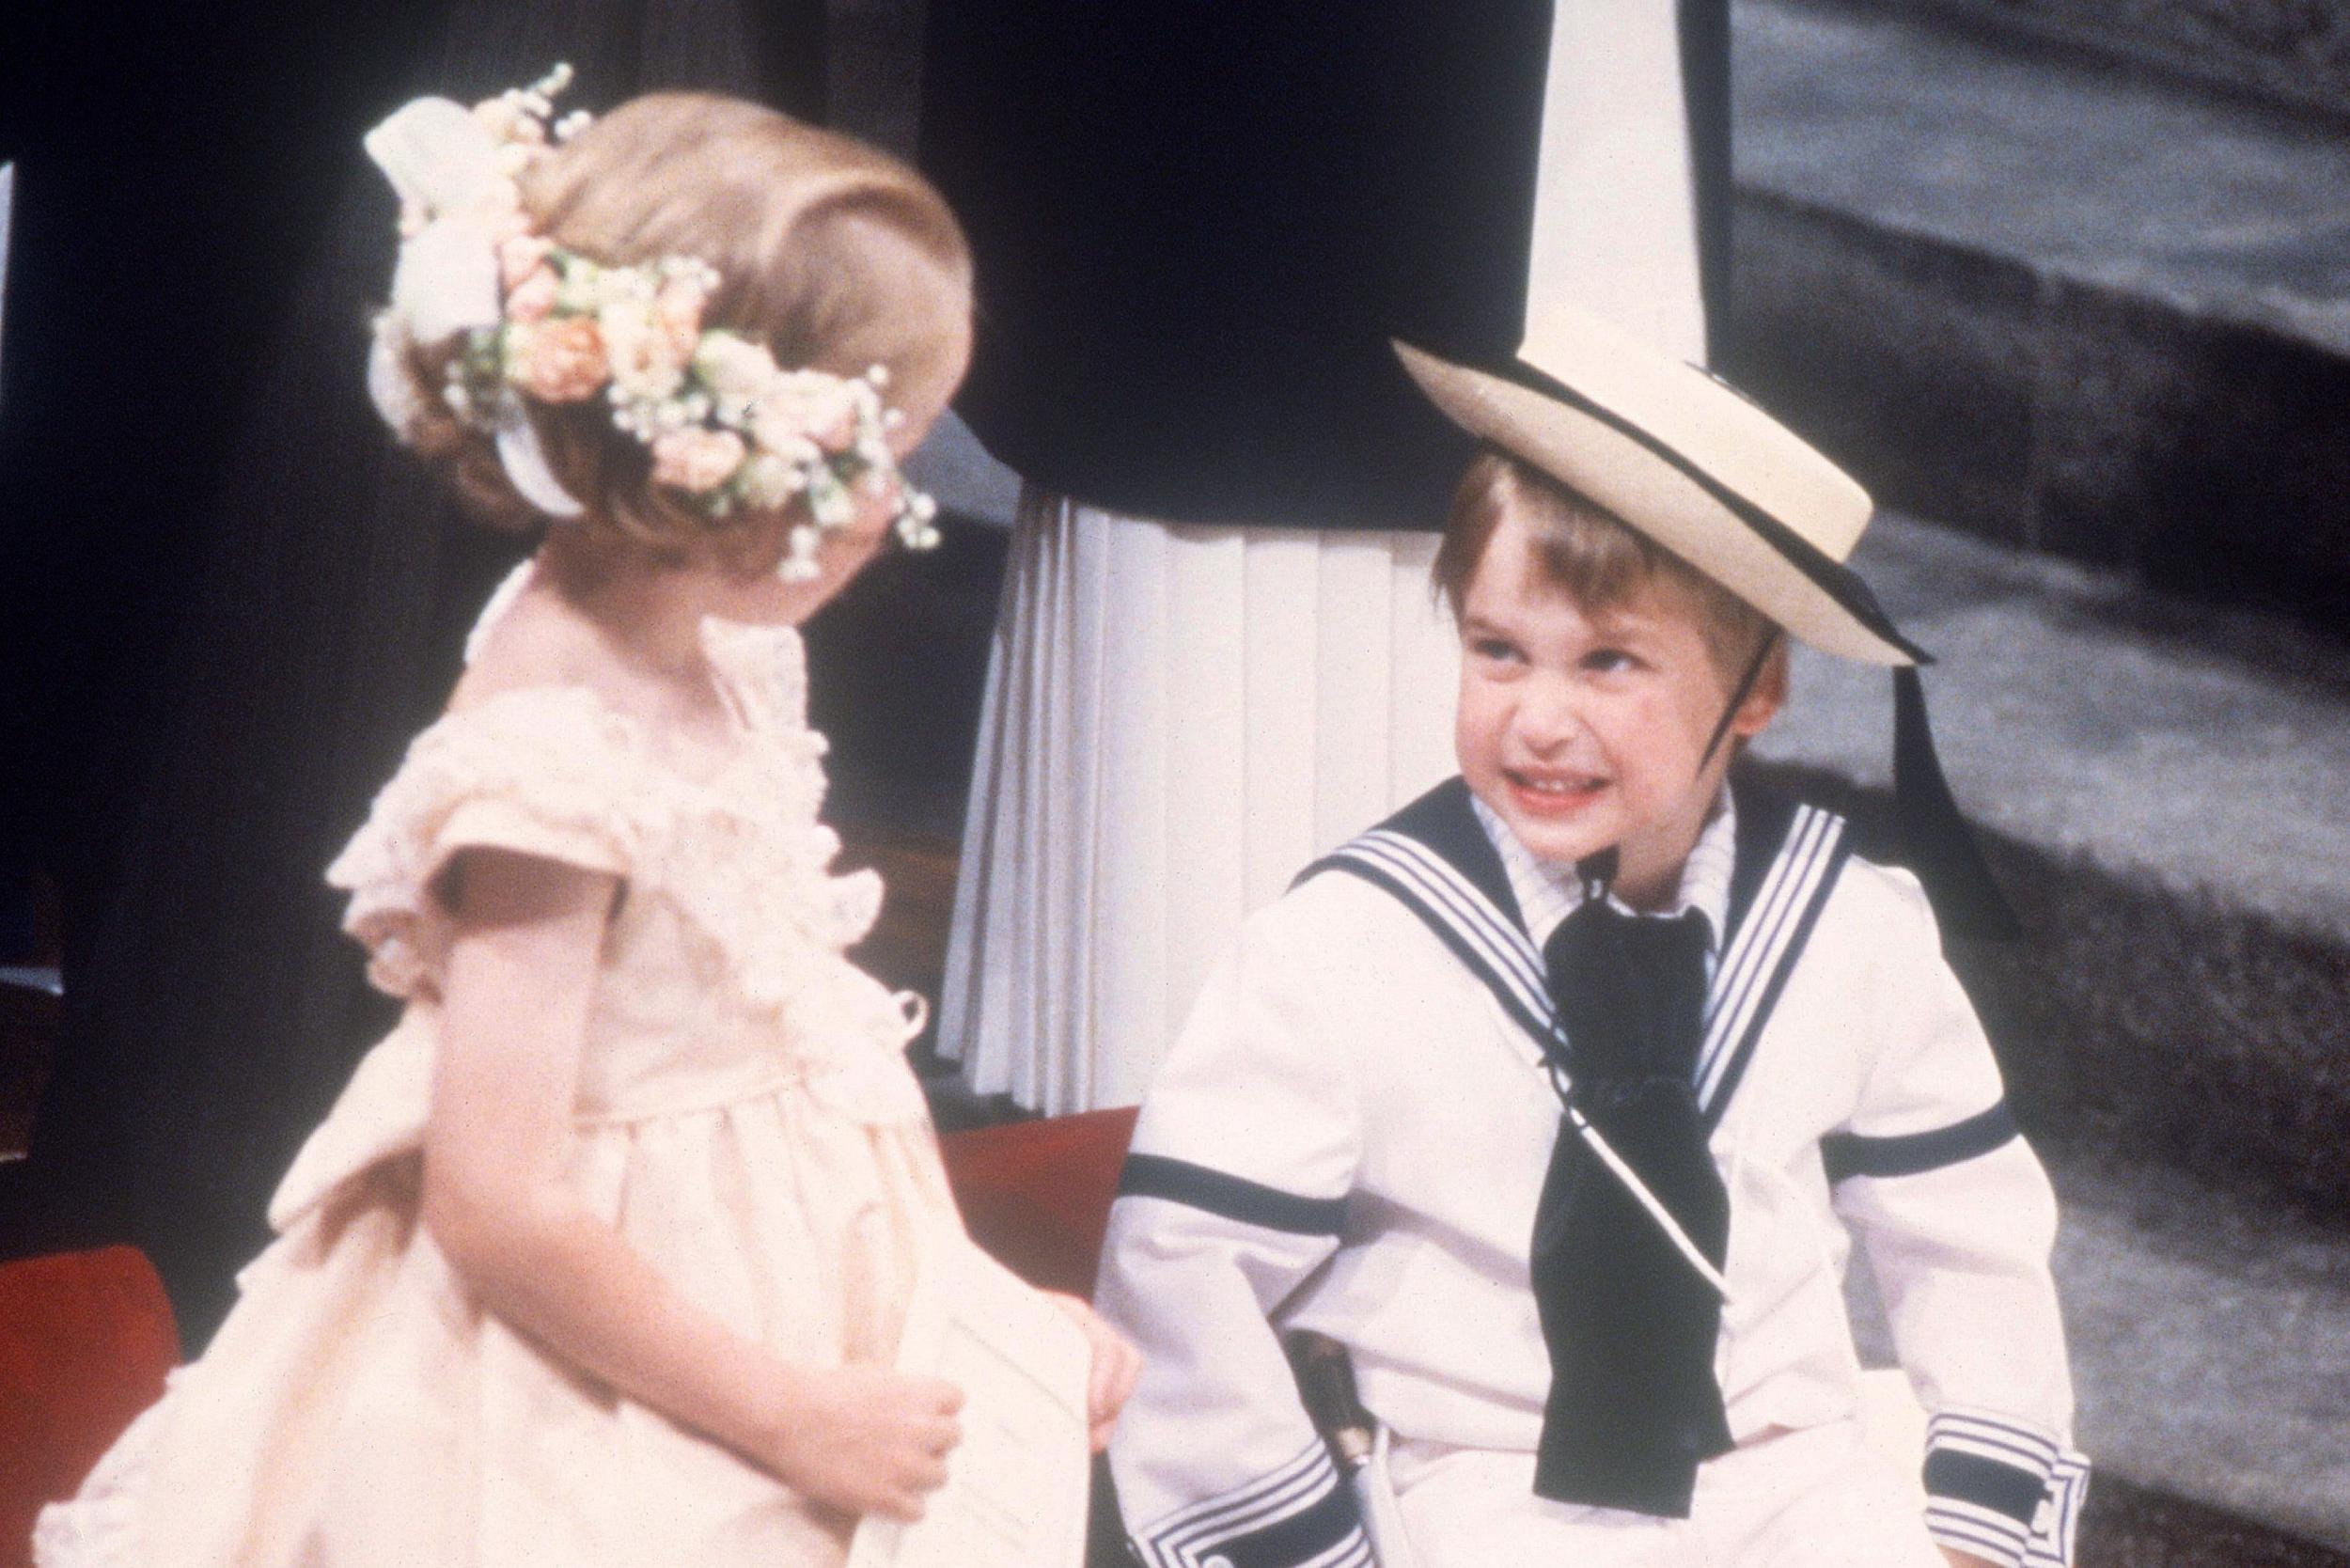 Prince William smiles at a bridesmaid at the wedding of Prince Andrew and Sarah Ferguson in 1986